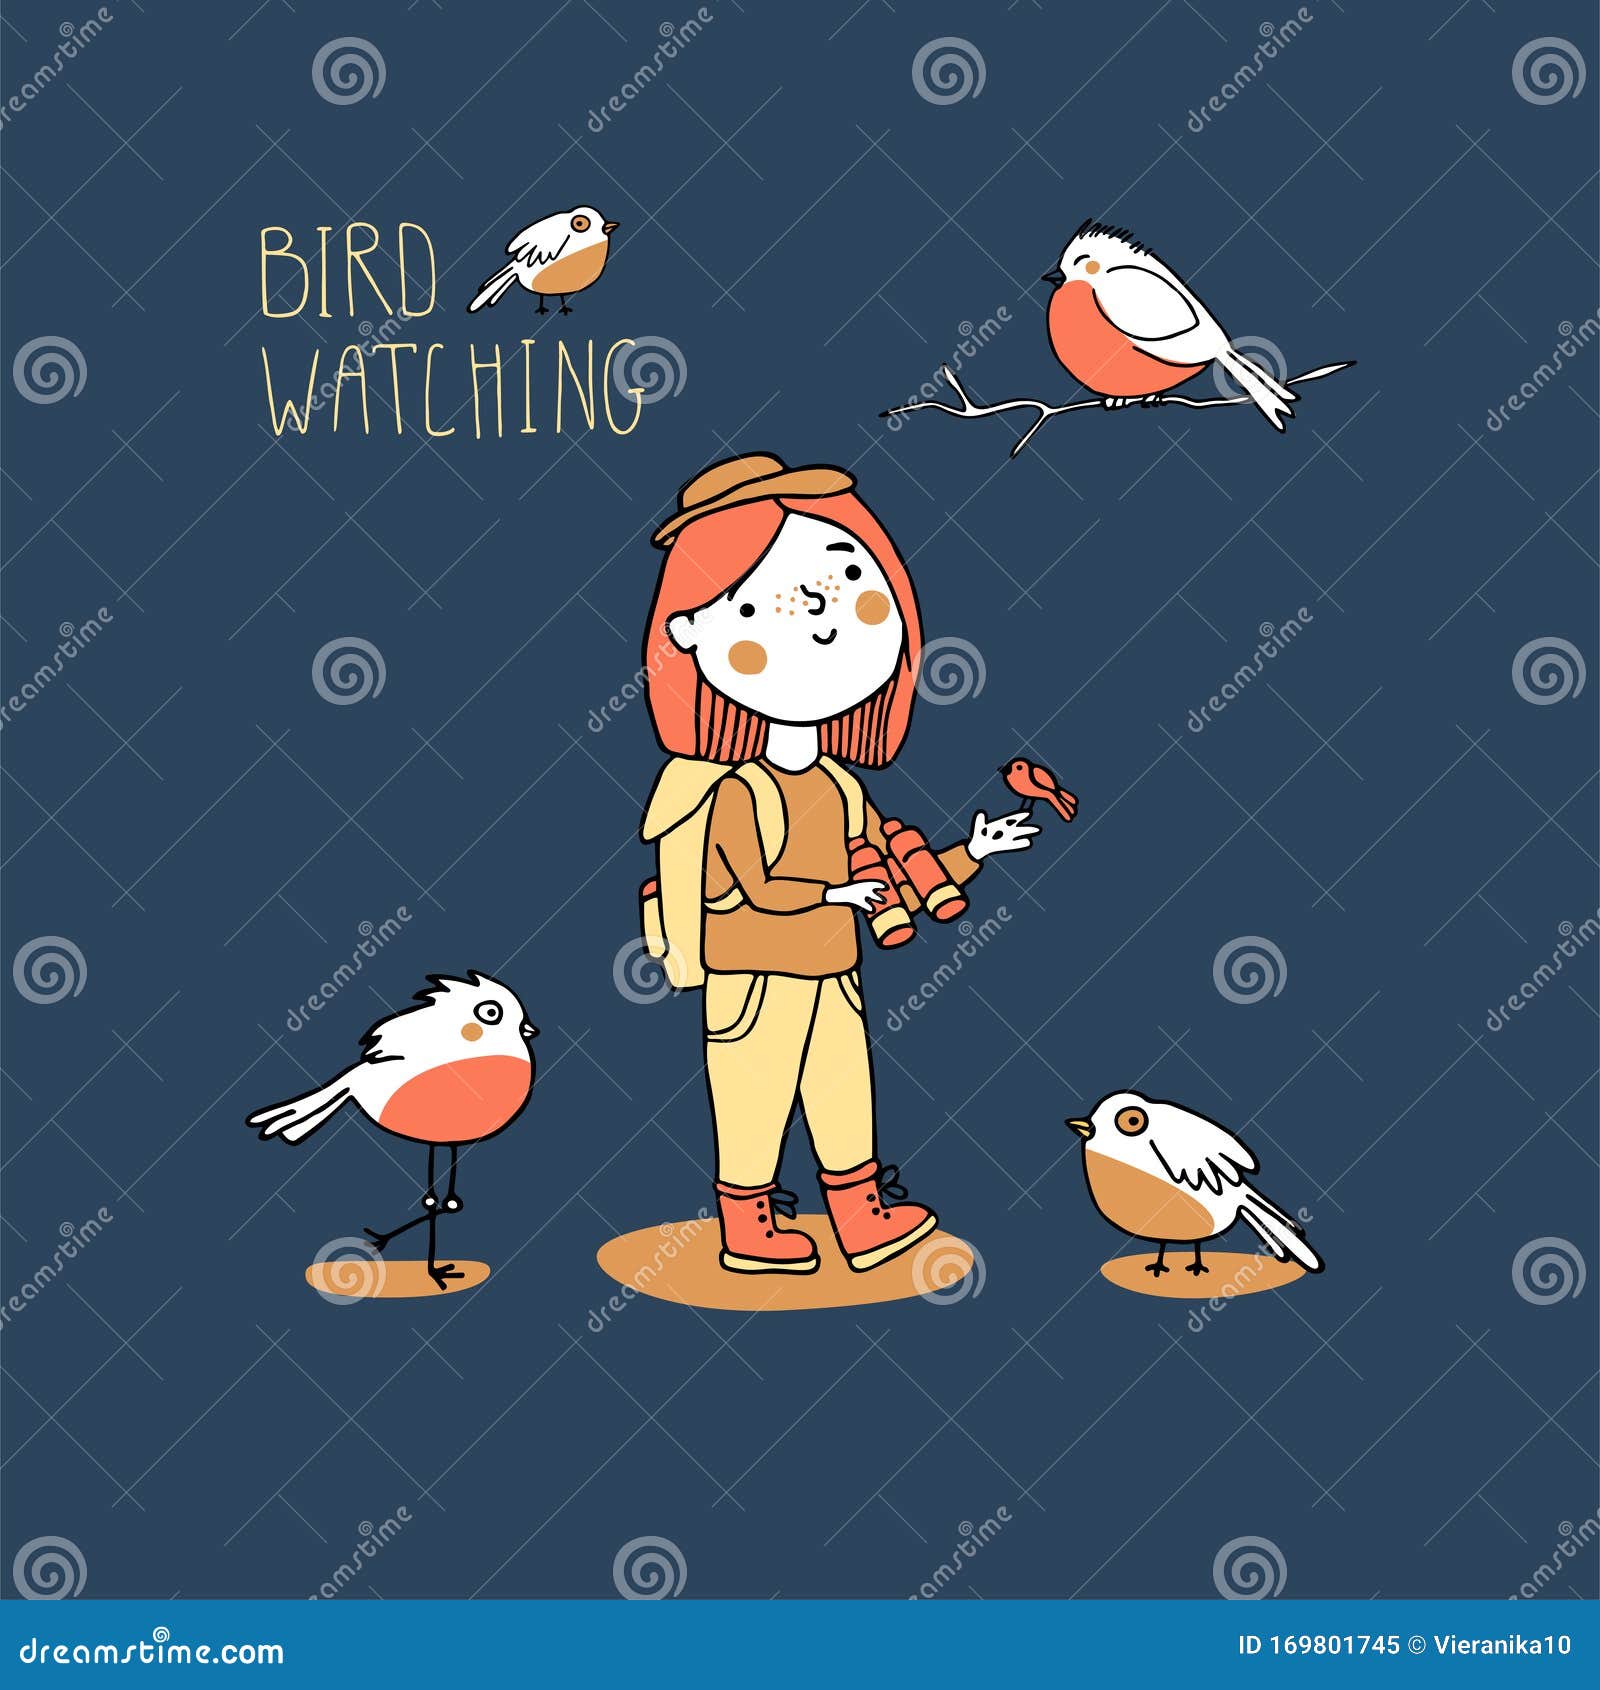 young girl bird watching. birding and ornithology concept